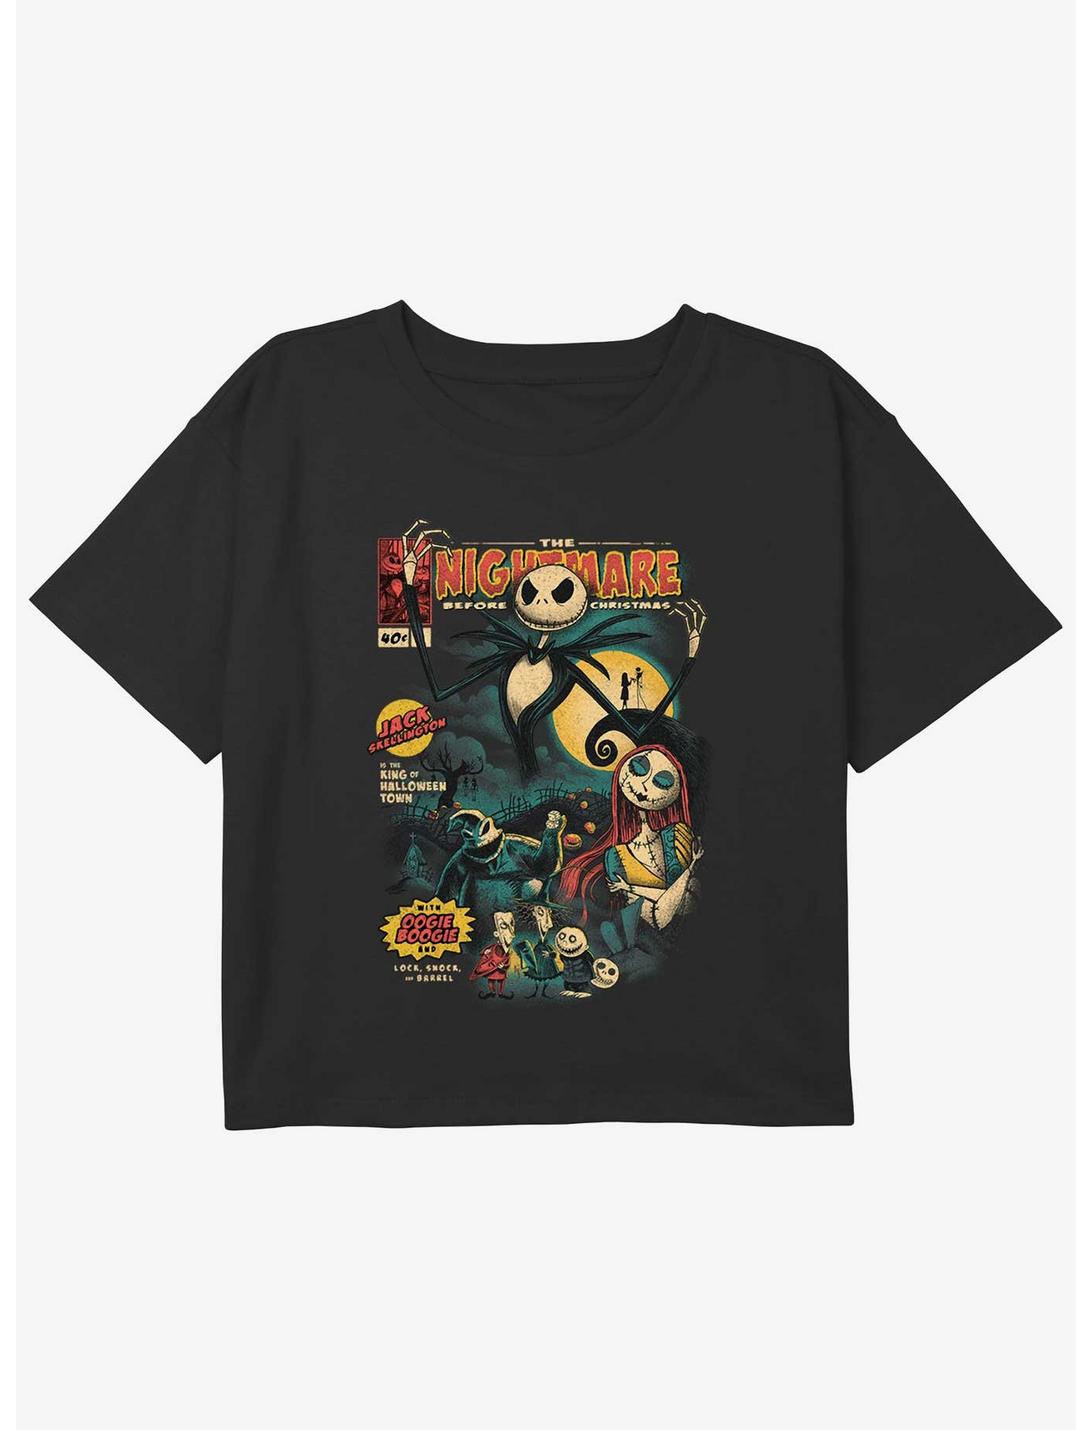 Disney The Nightmare Before Christmas Comic Cover Girls Youth Crop T-Shirt, BLACK, hi-res